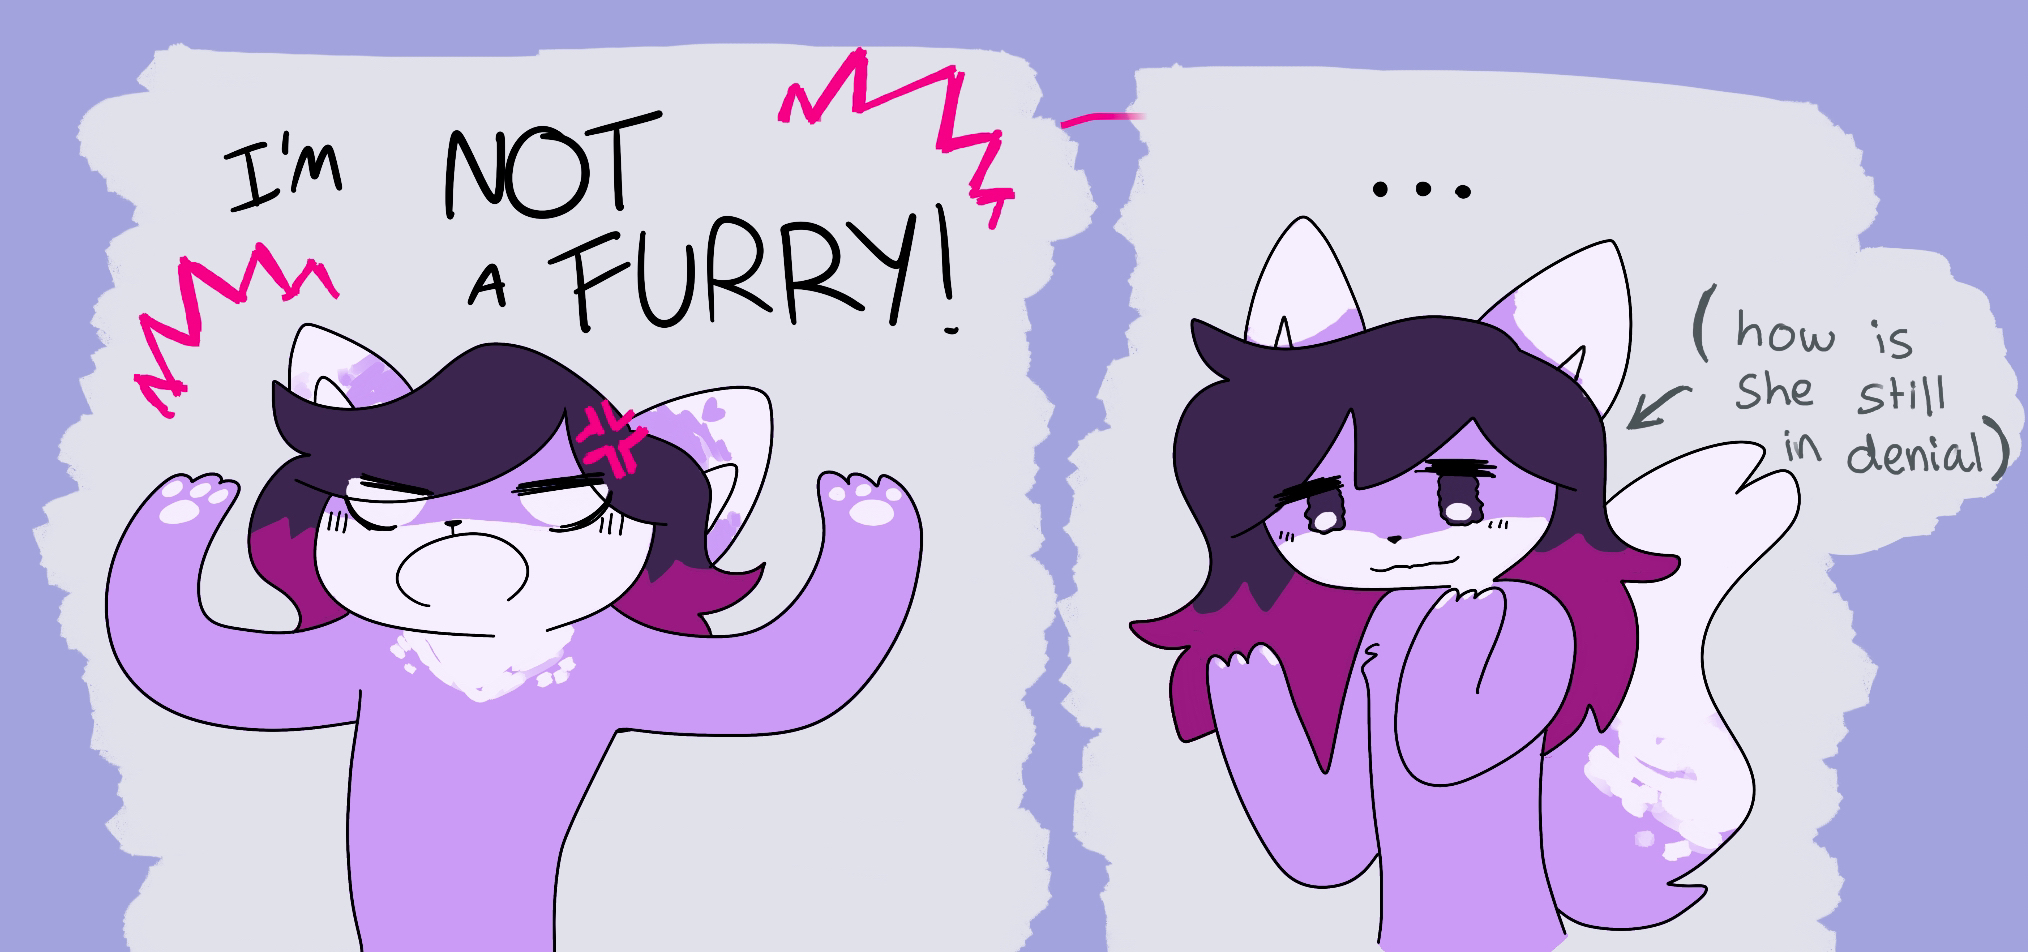 rough 2 panel pastel comic. first one has my fursona exclaiming 'IM NOT A FURRY!', with her arms up as if she's shaking her fists. the second panel has her looking degected, almost contemplating existance, with small text captioning her '(how is she still in denial)